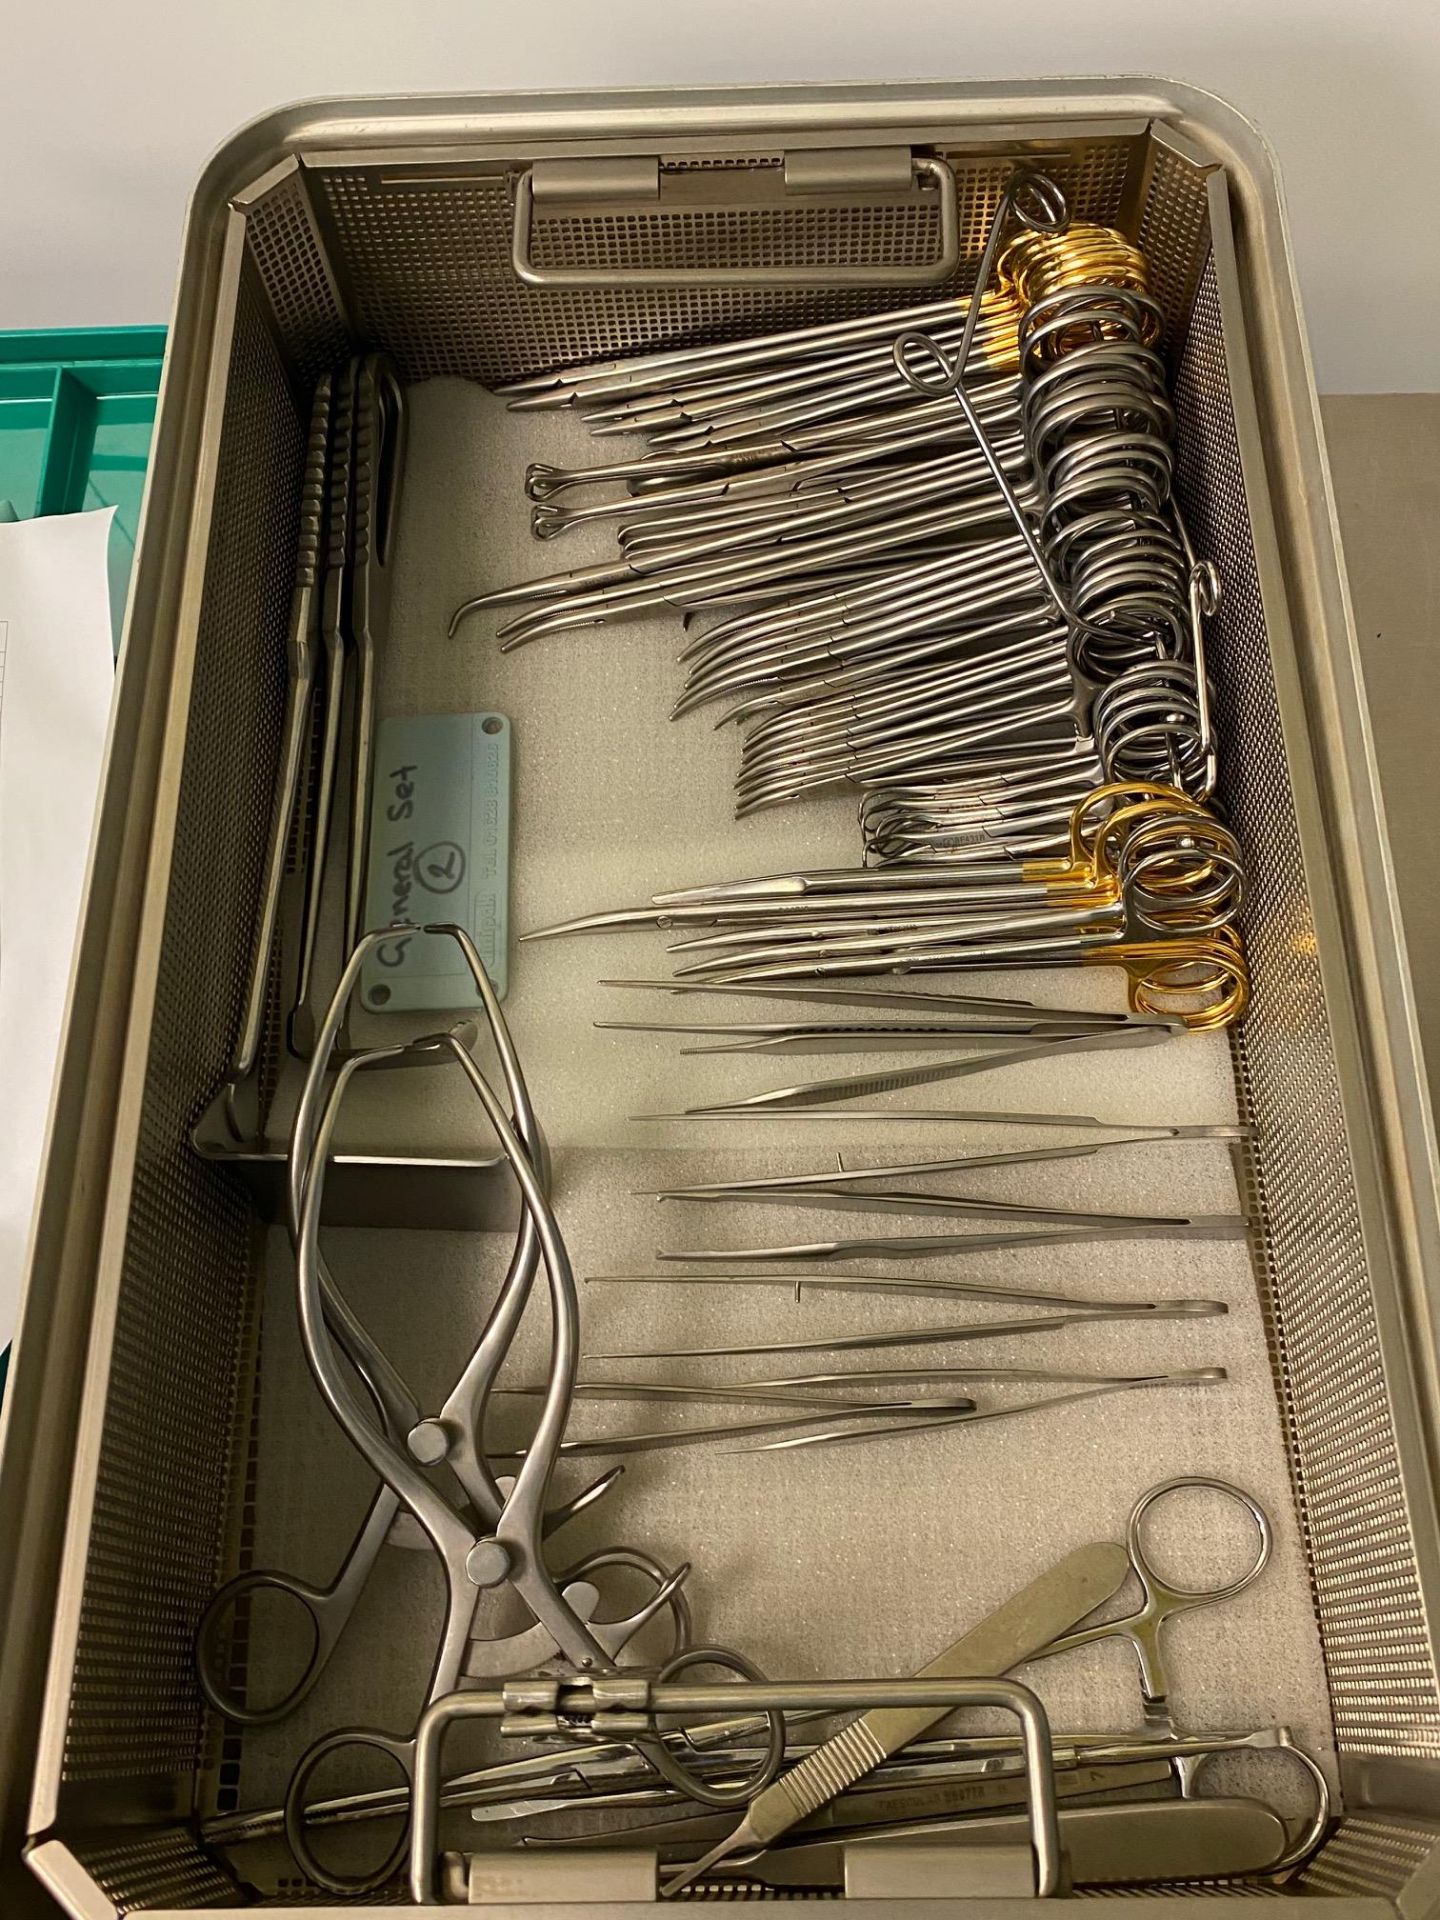 Aesculap surgical storage container with general surgical instruments - Please note container - Image 2 of 7